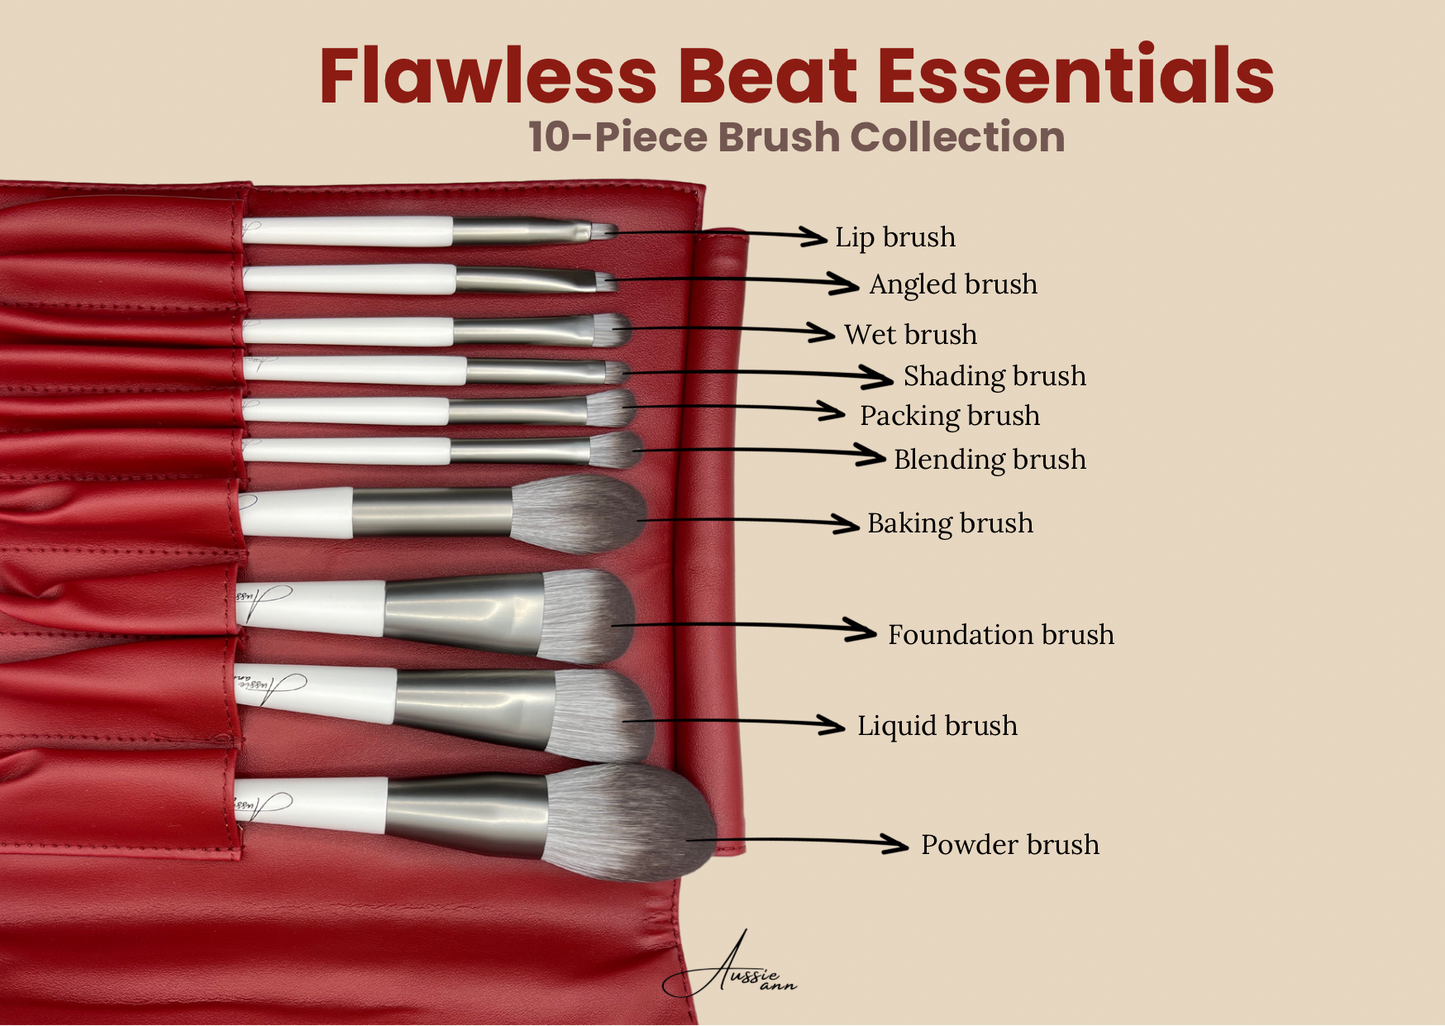 Flawless Beat Essentials 10-Piece Brush Collection 